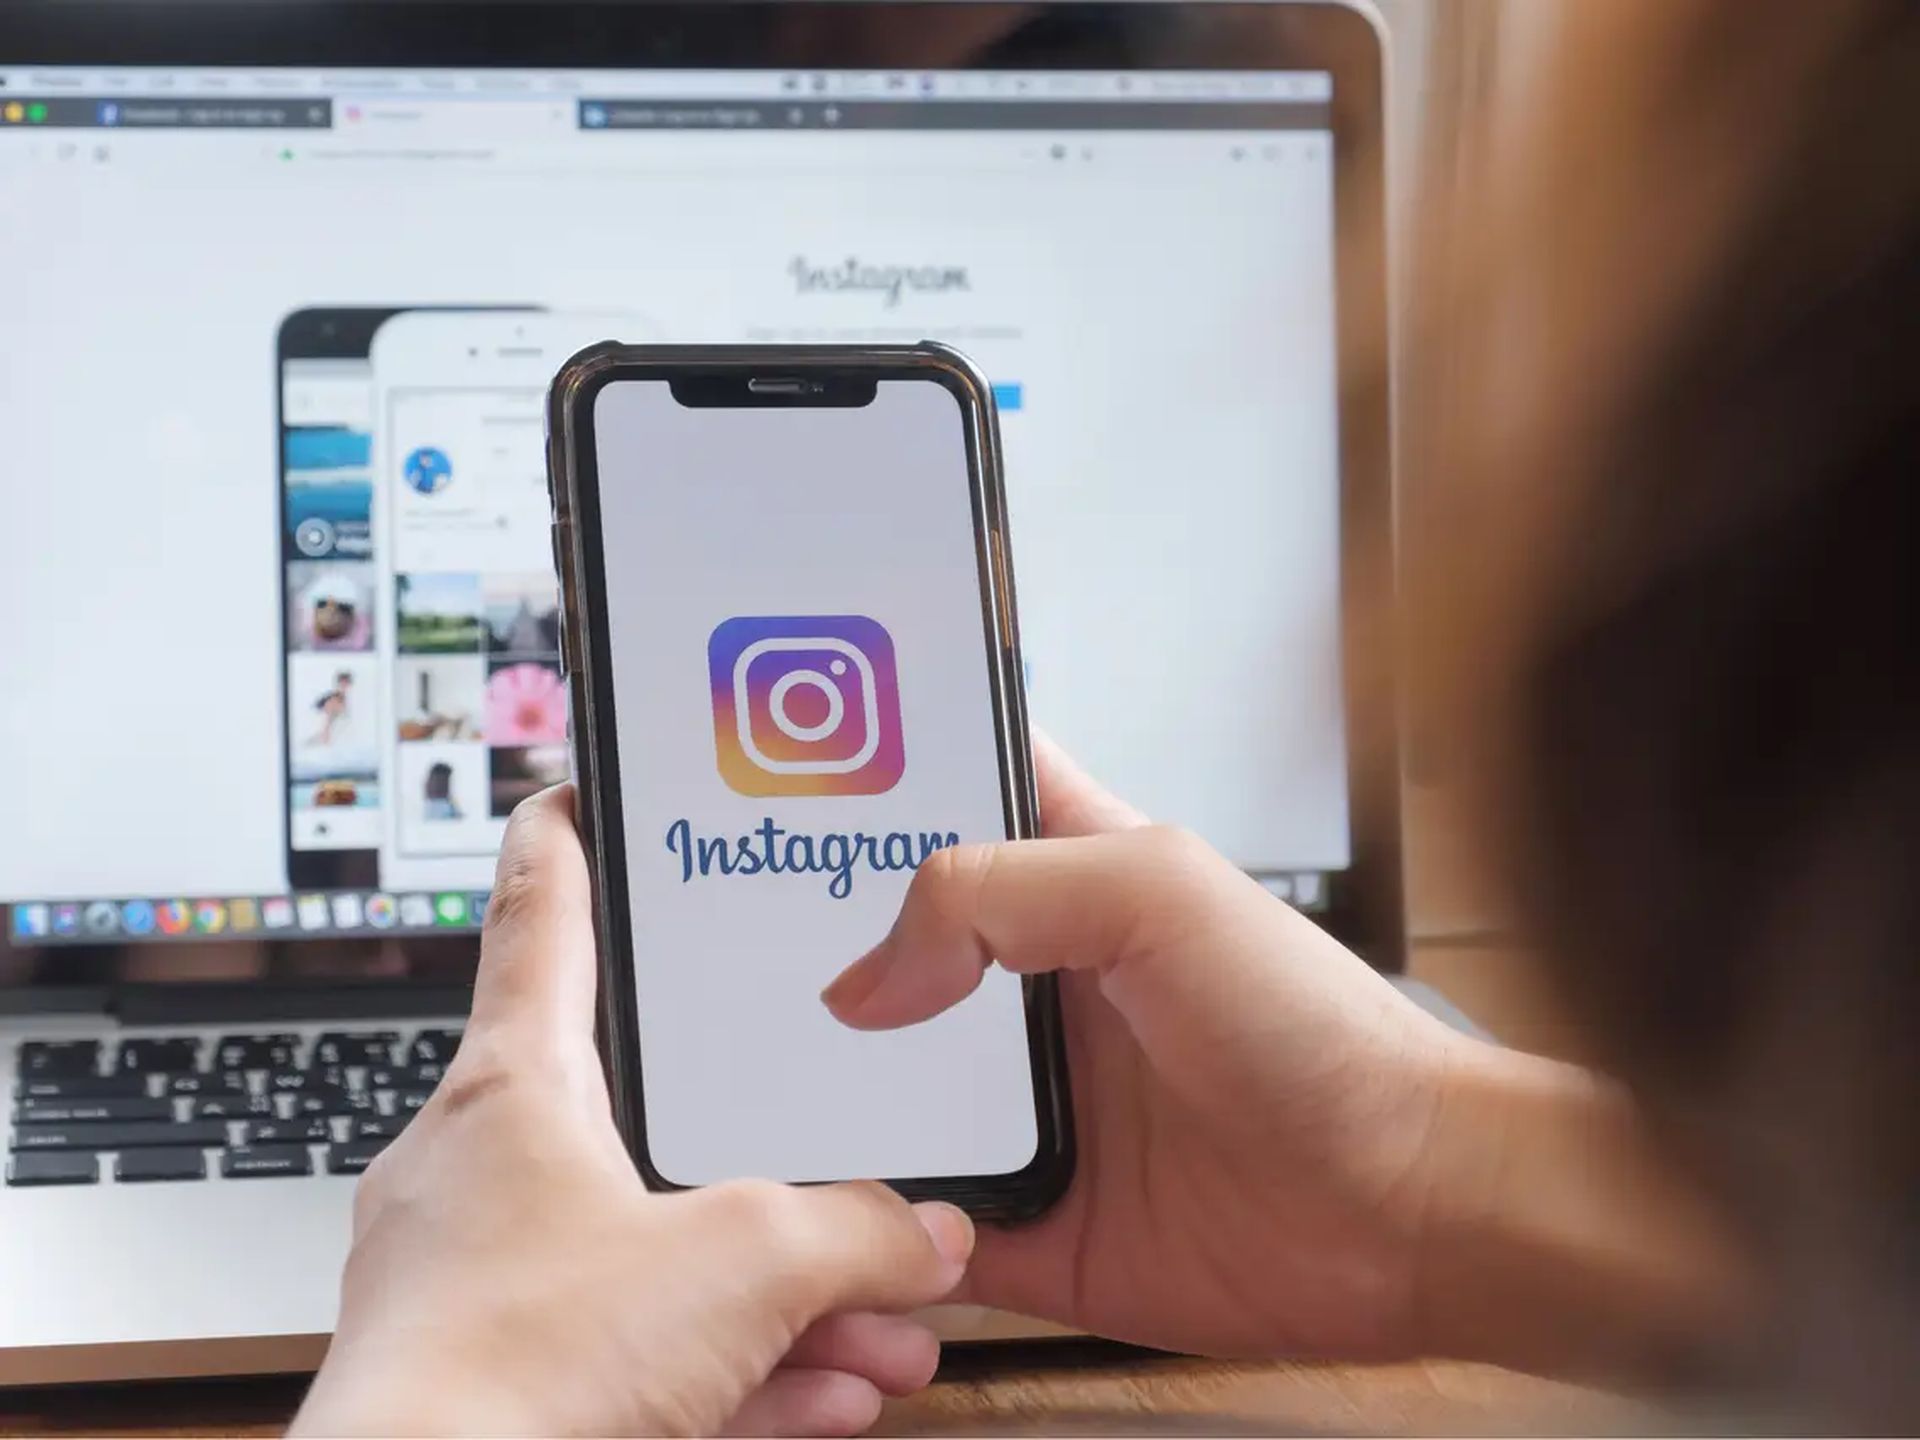 Can't send messages on Instagram: How to fix it?